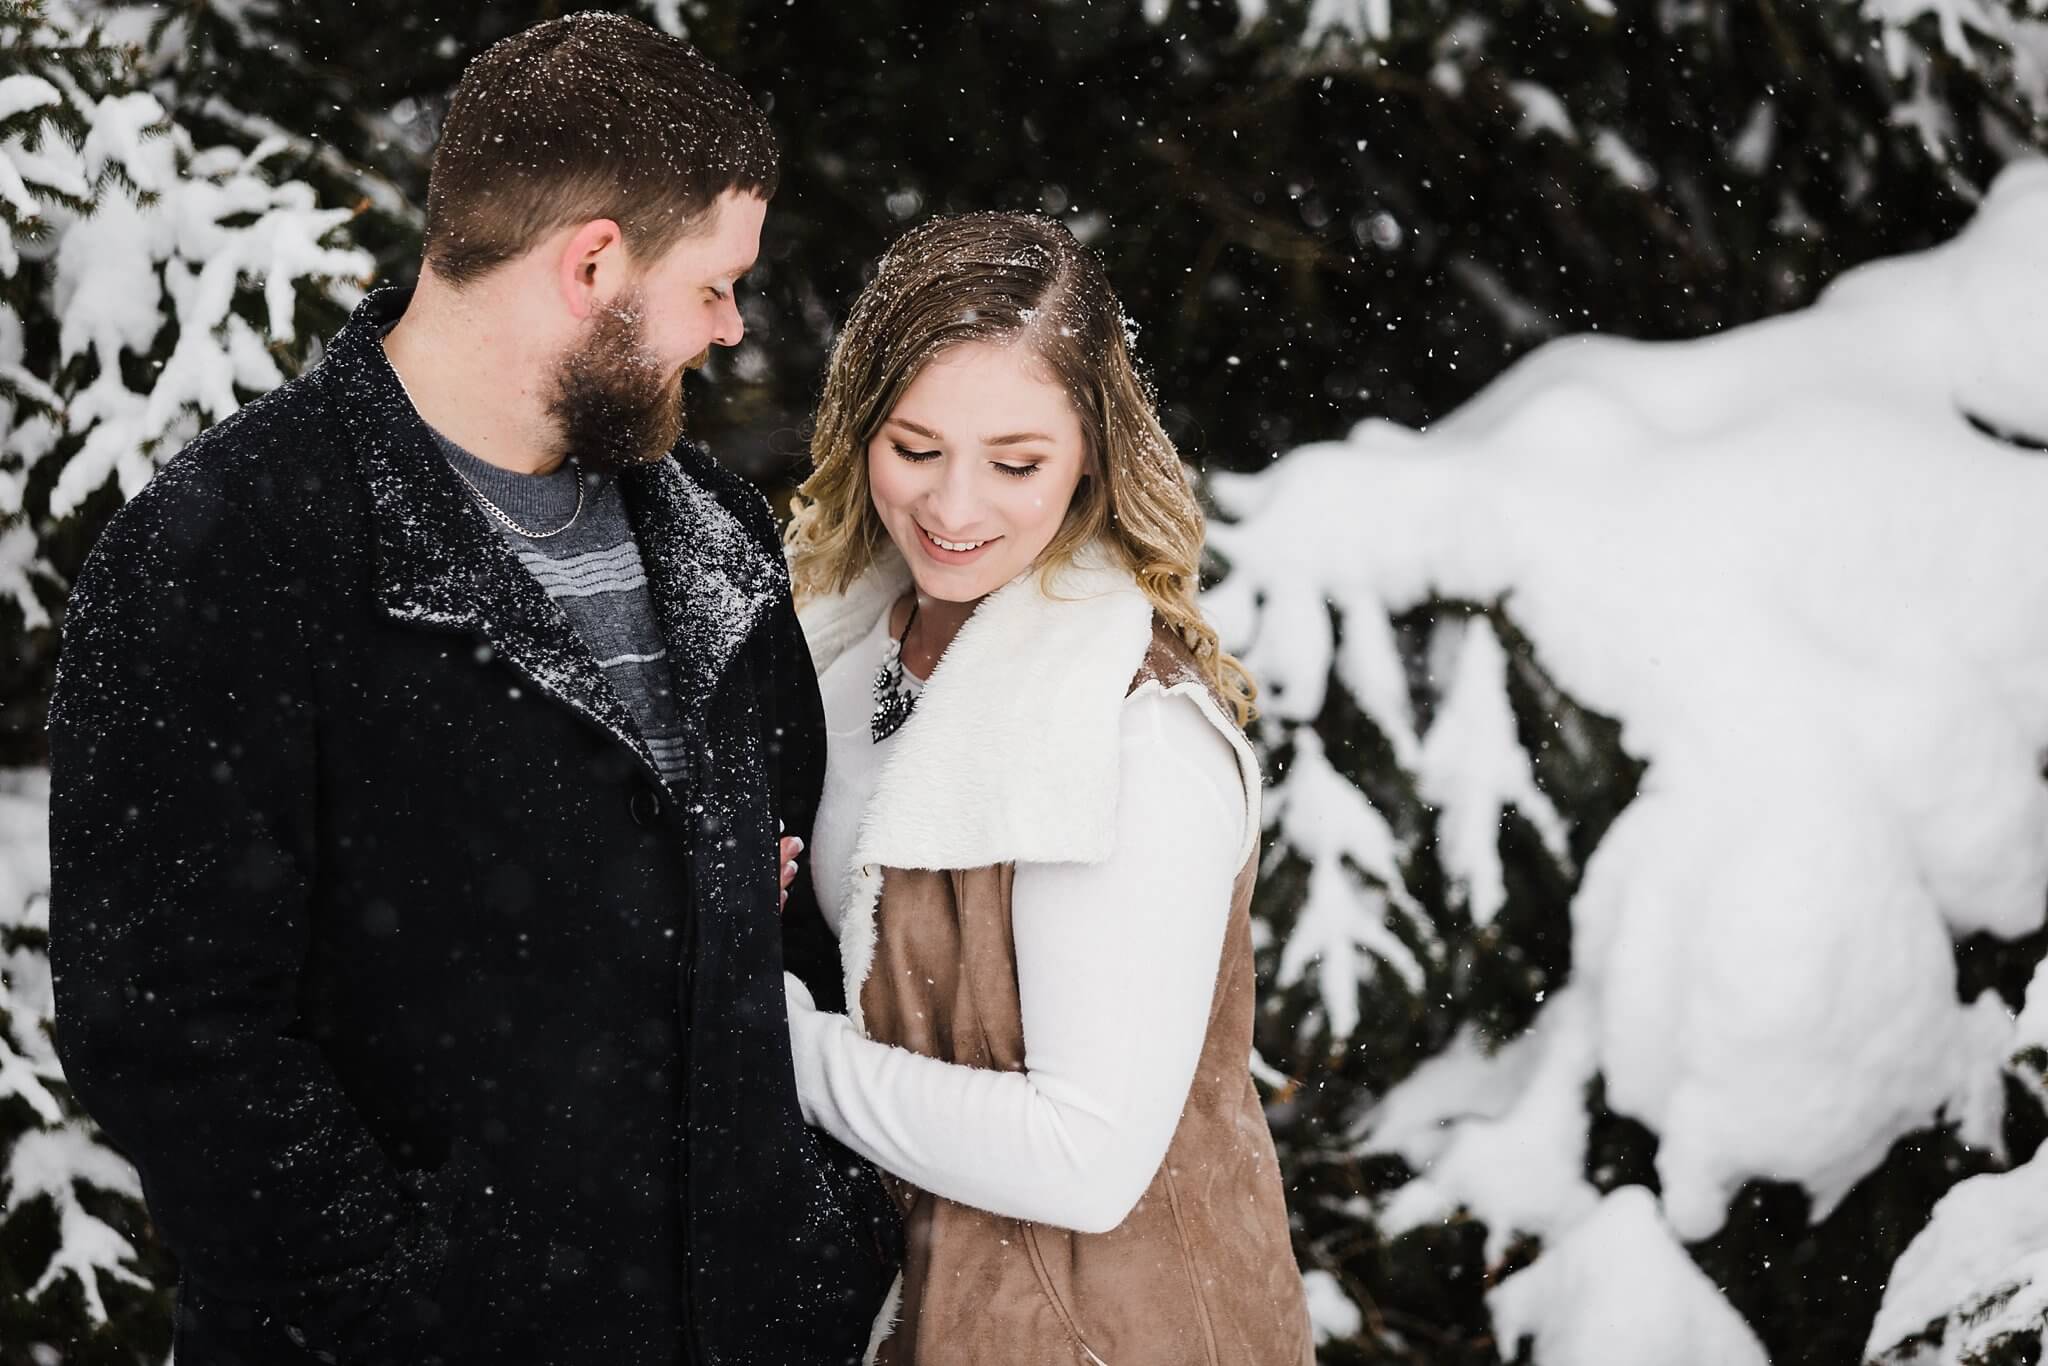 Girl looking towards the ground smiling as her fiance looks at her during their winter engagement session